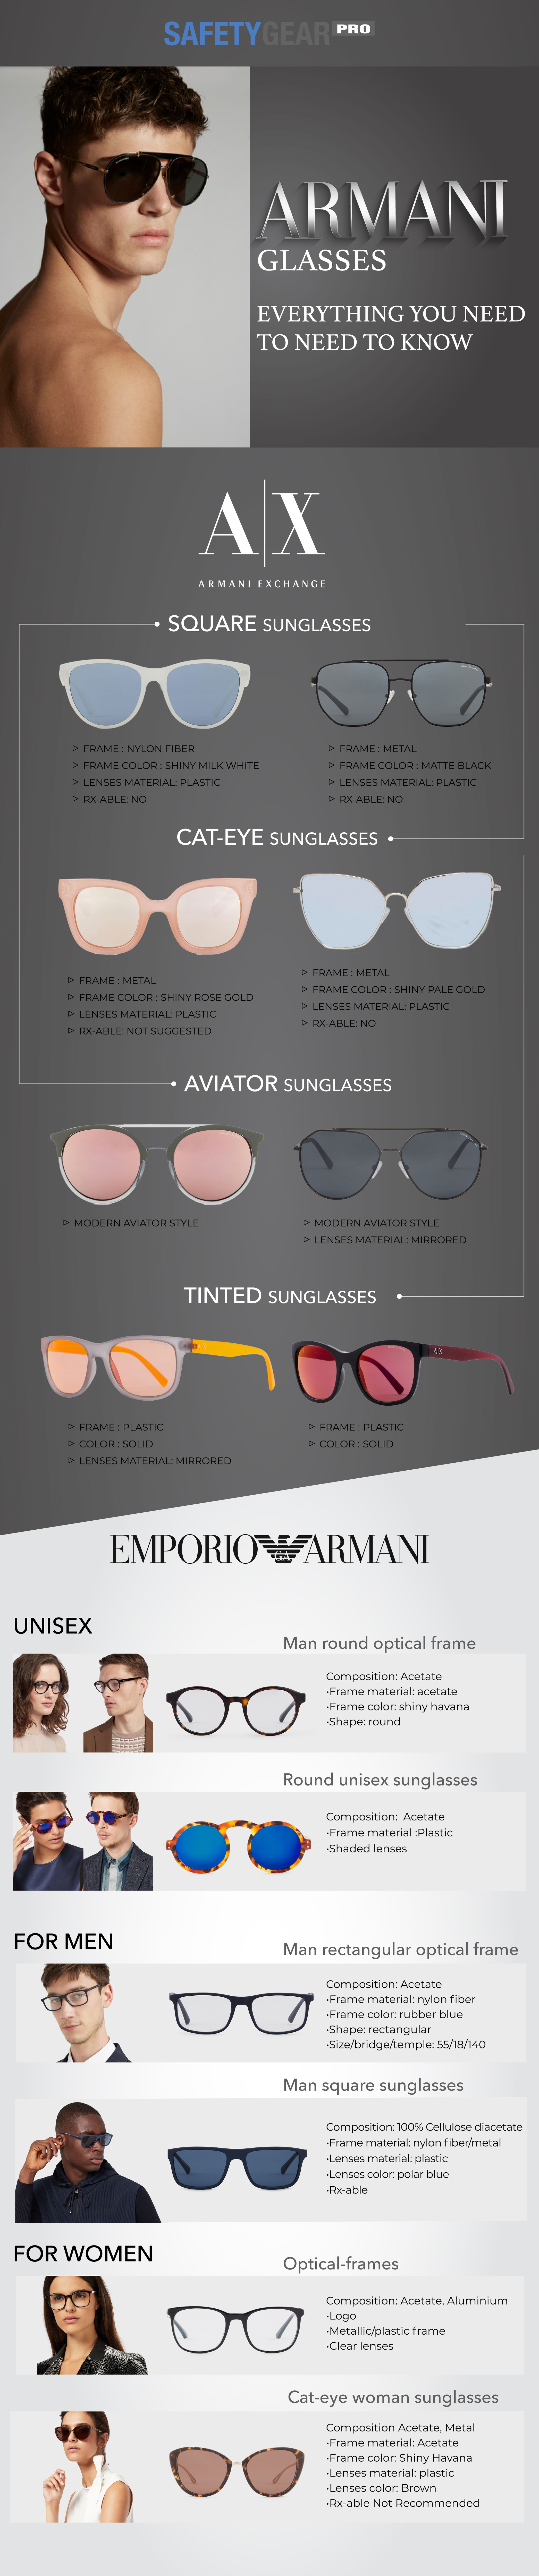 Armani Glasses: Everything You Need To Know Infographic